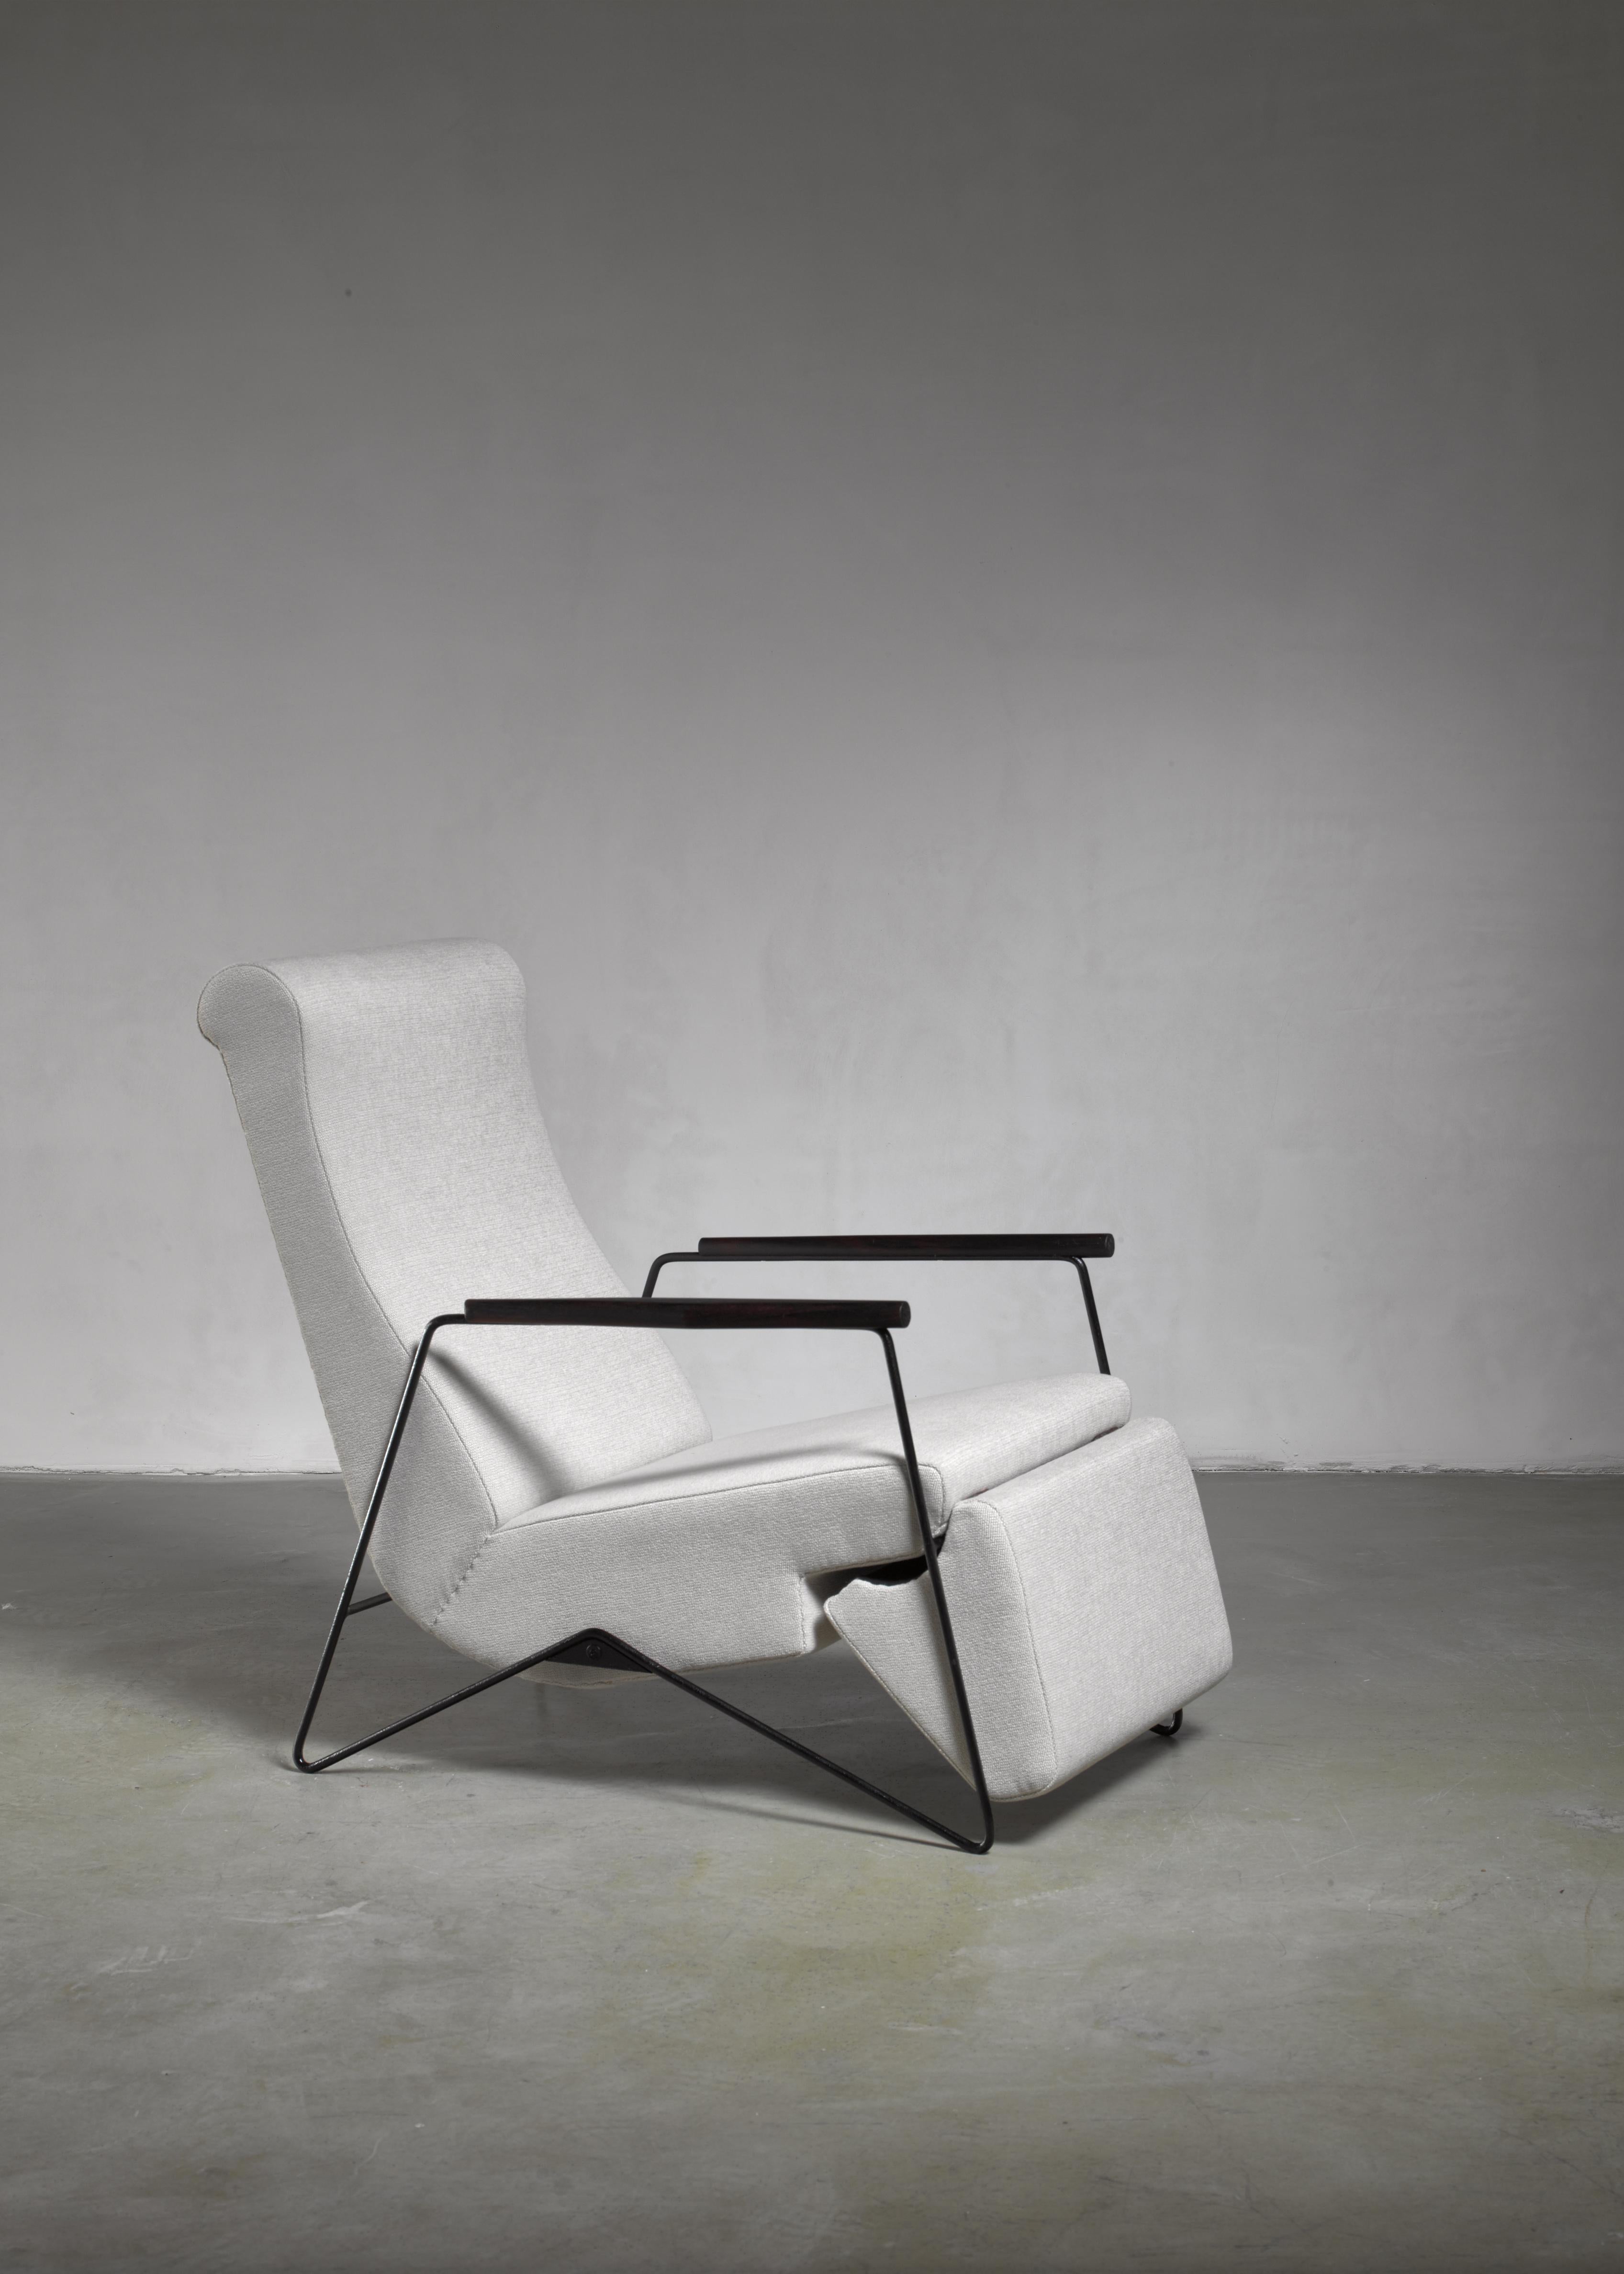 A reclining lounge chair by Carlo Hauner's brother Ernesto Hauner. The chair is standing on thin metal legs and with wooden armrests. It has been professionally reupholstered with off-white De Ploeg wool.

The chair can be placed in two different